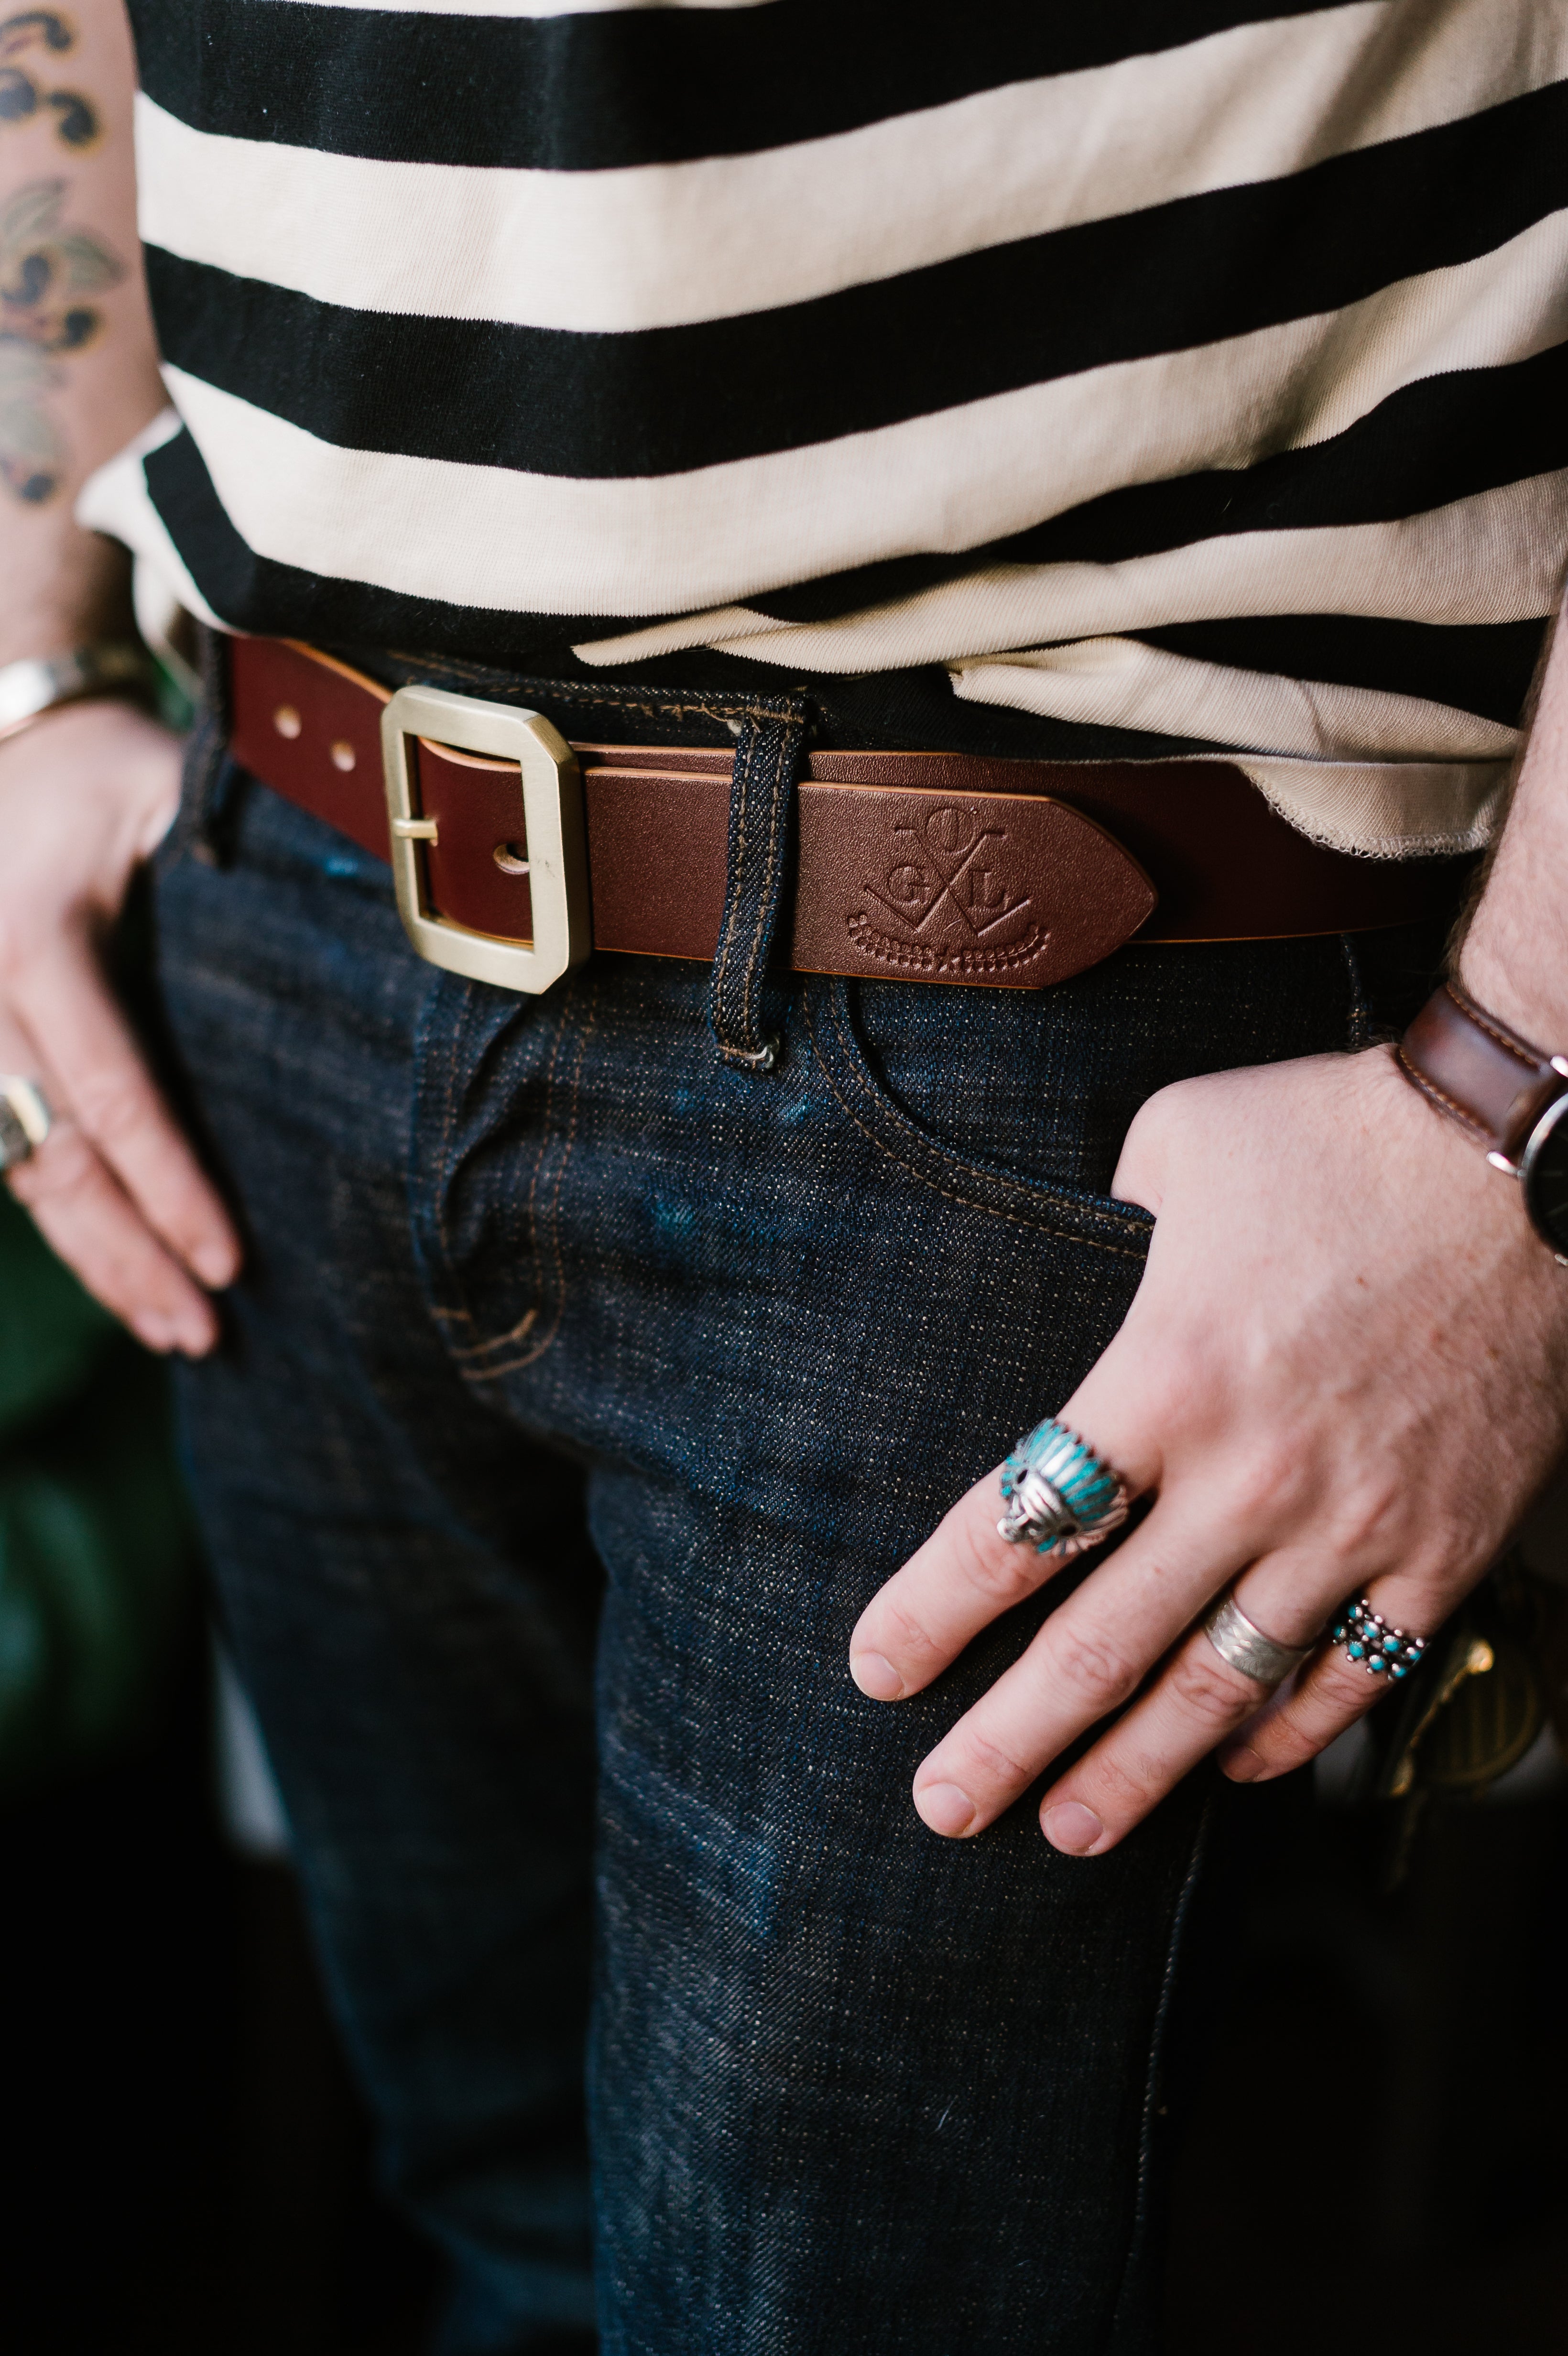 Dark Tan English Point Hand-Dyed Leather Jeans Belt